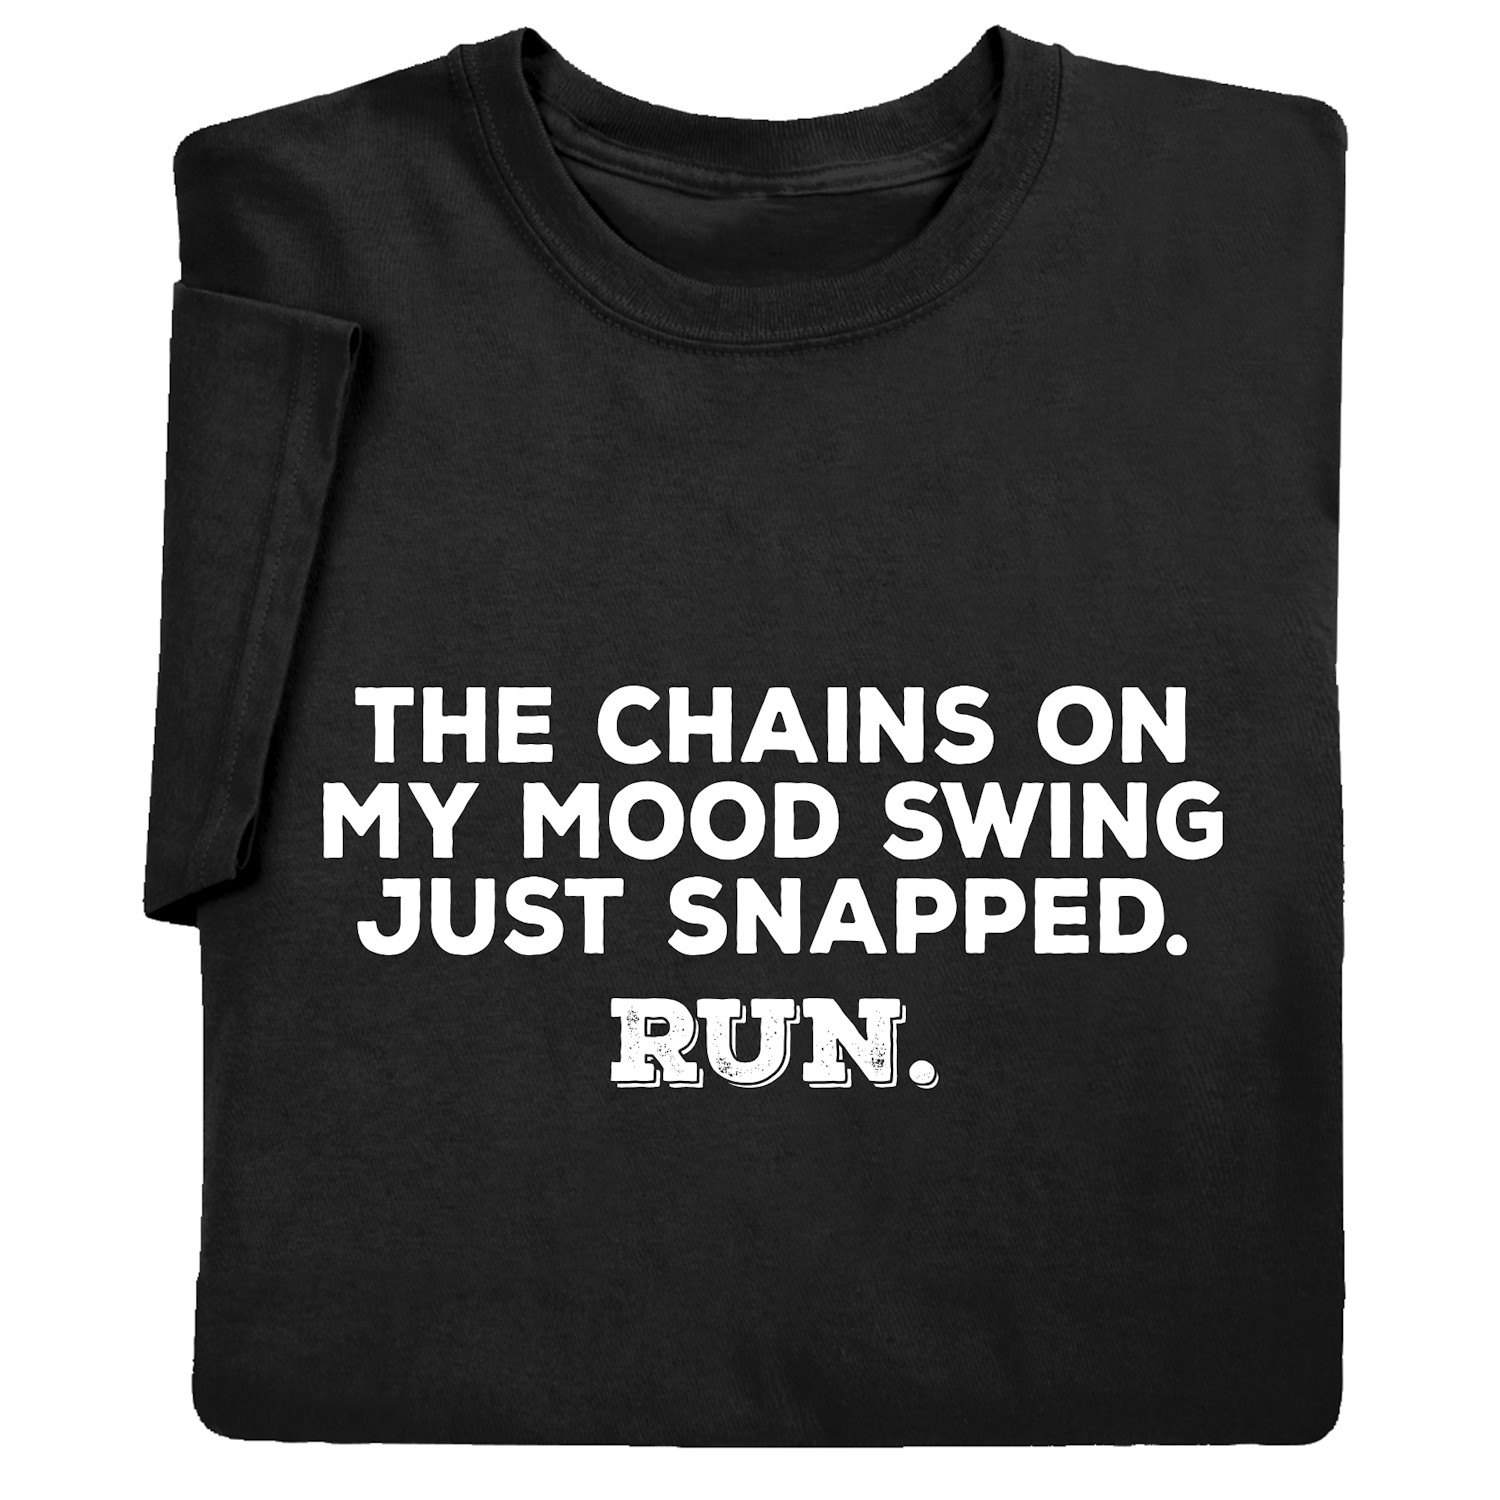 The Chains on My Mood Swing Just Snapped Shirts | Signals